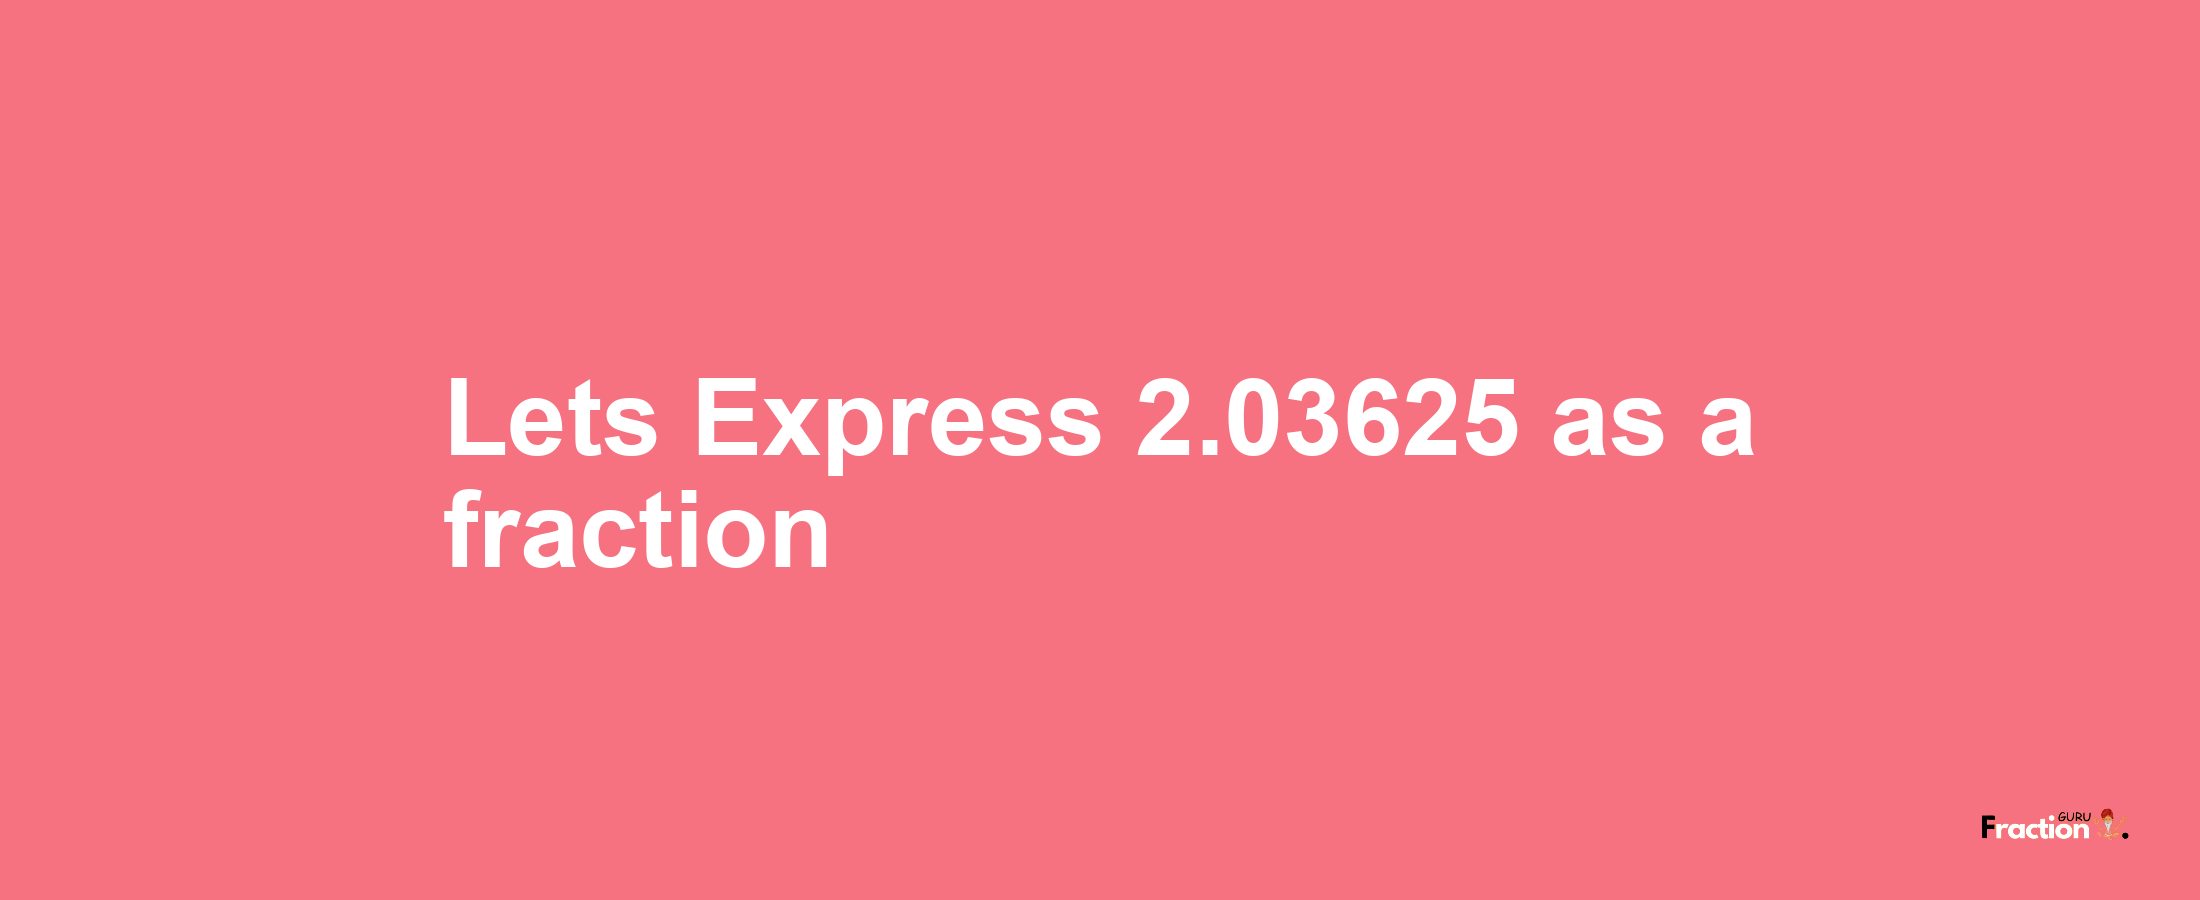 Lets Express 2.03625 as afraction